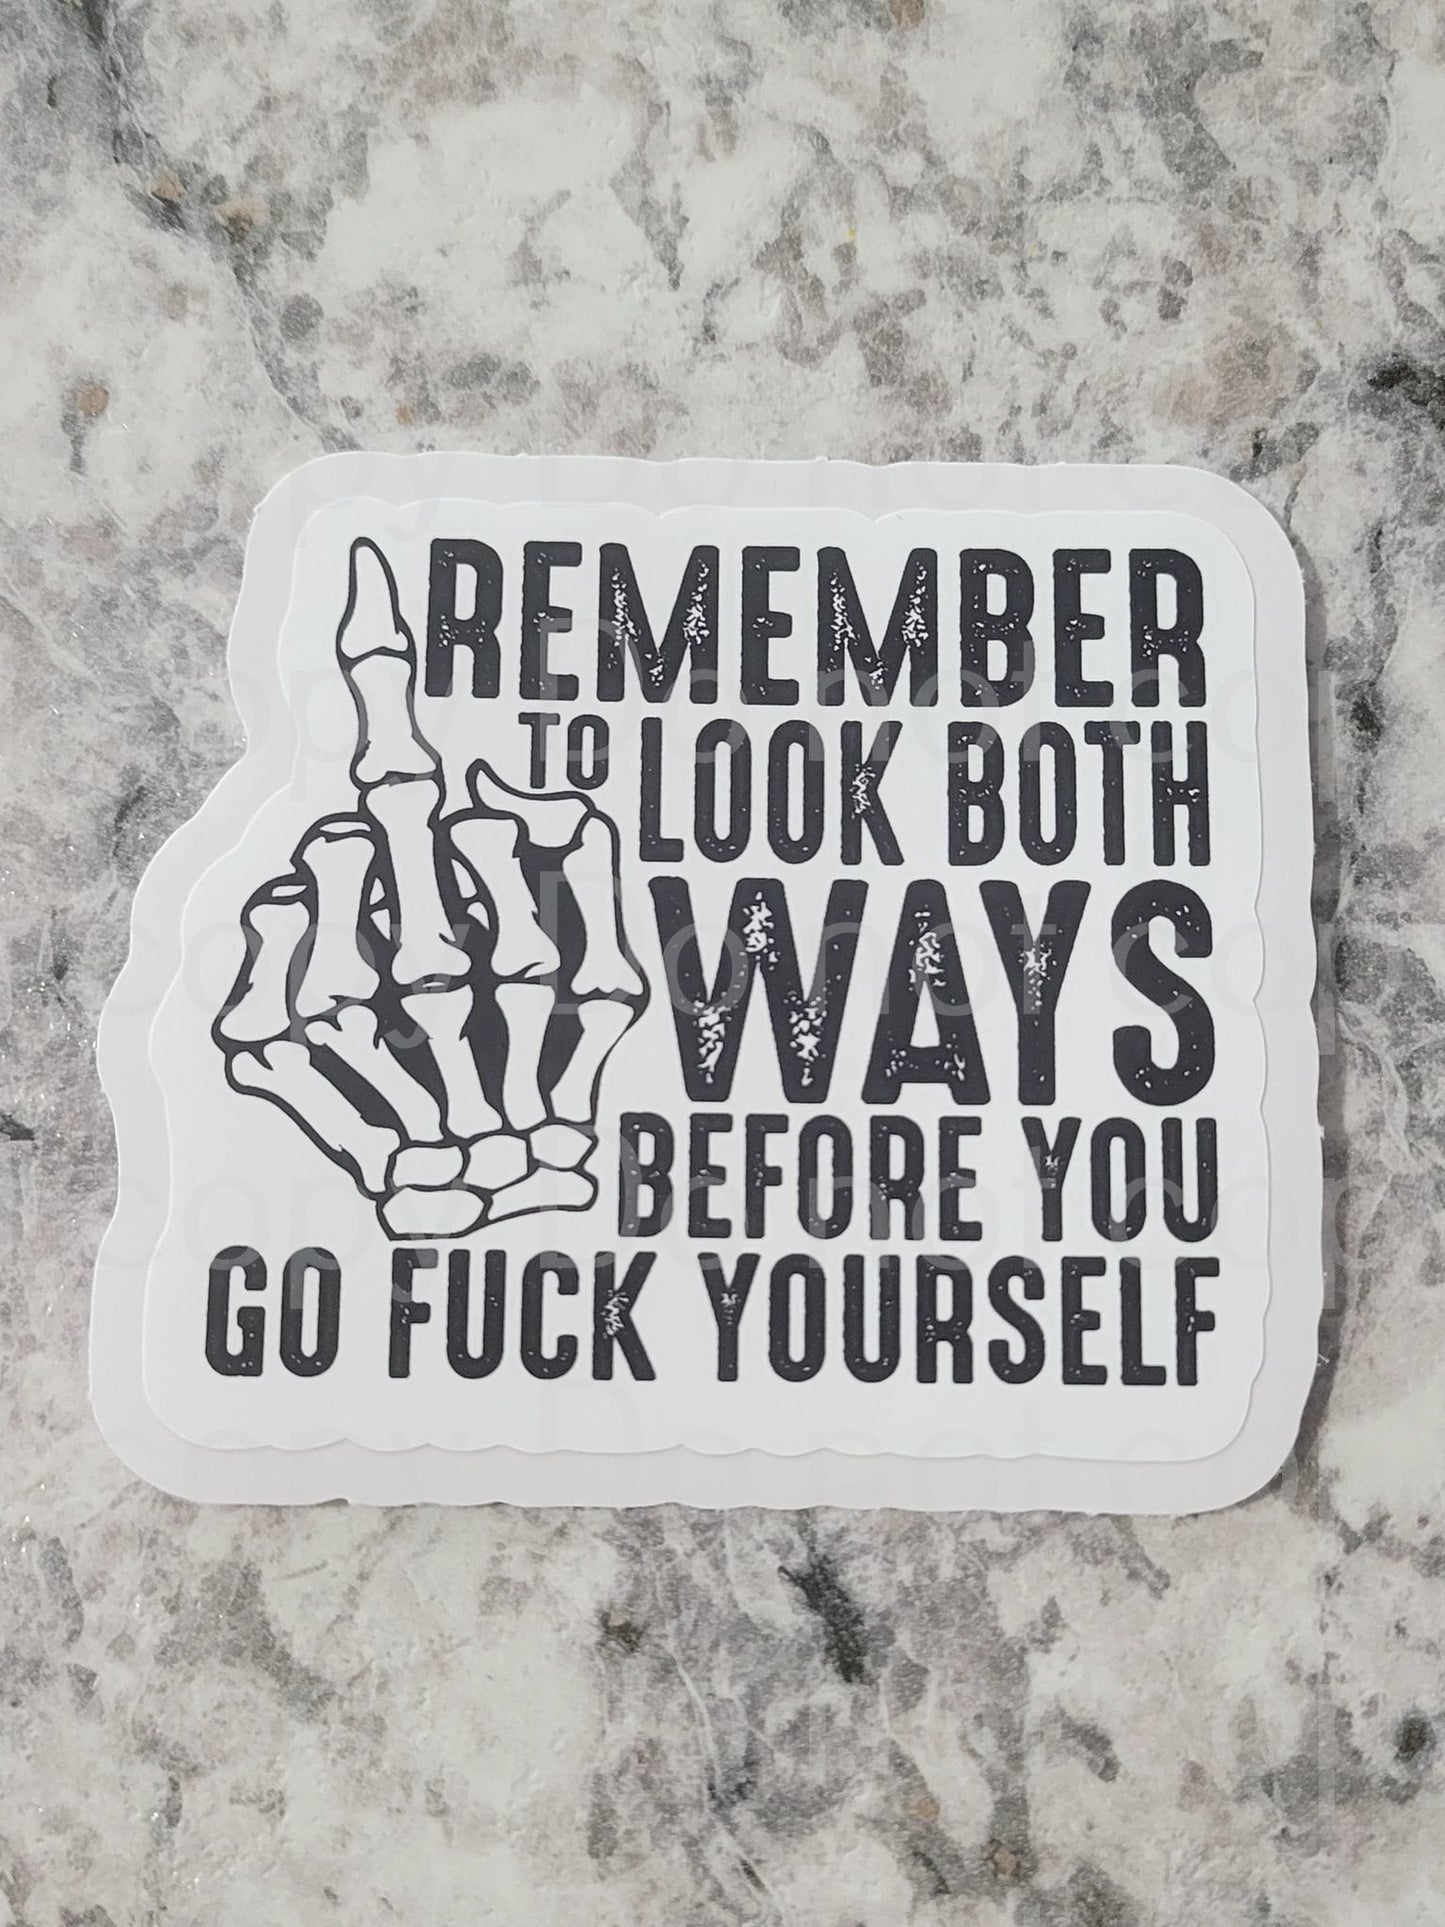 Remember to look both ways before you go fuck yourself Die cut sticker 3-5 Business Day TAT.